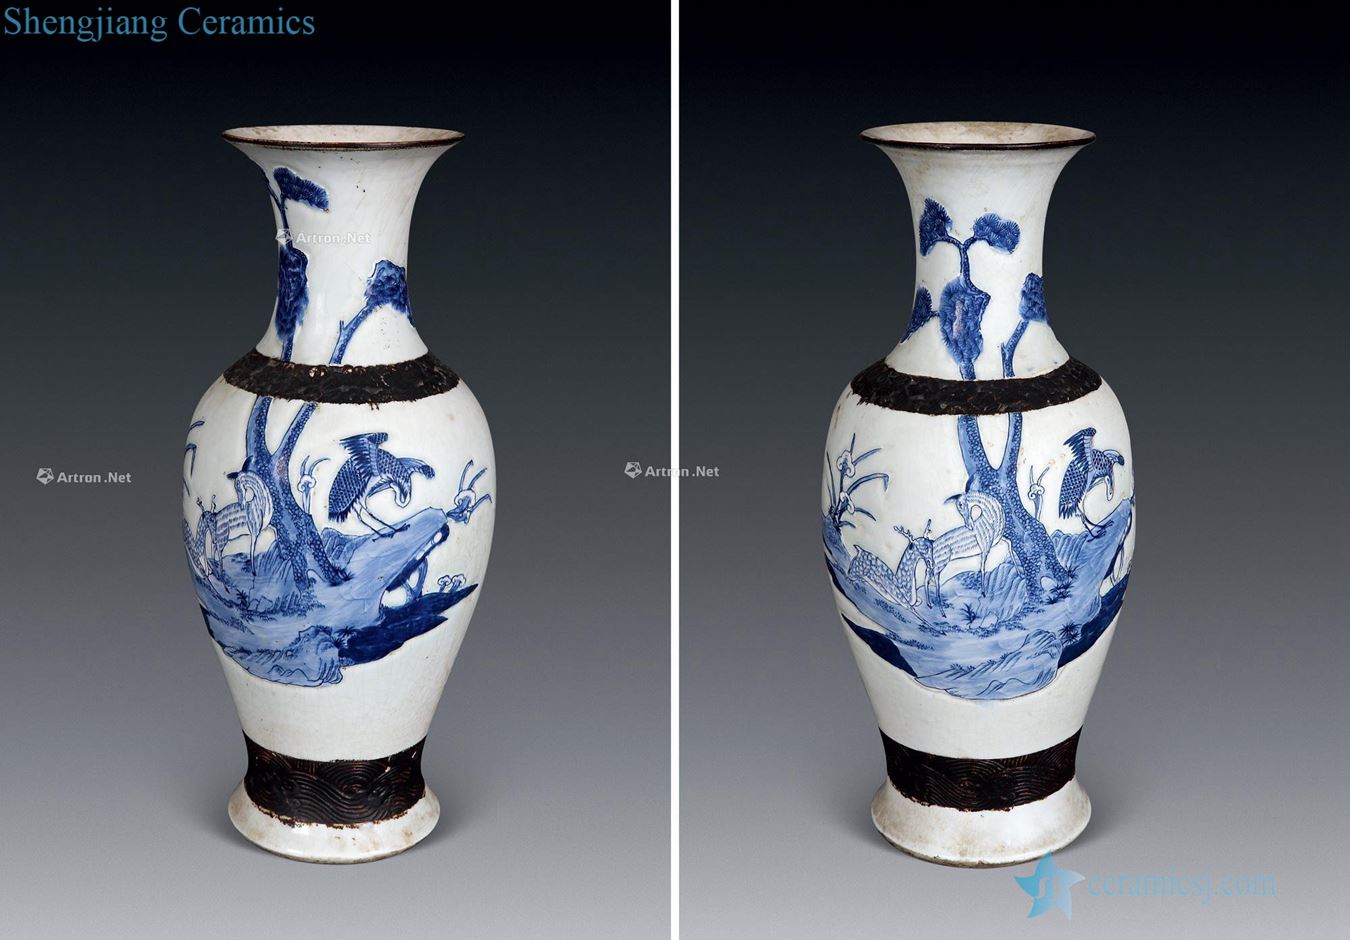 Iron edge in late qing dynasty porcelain bottle (a)